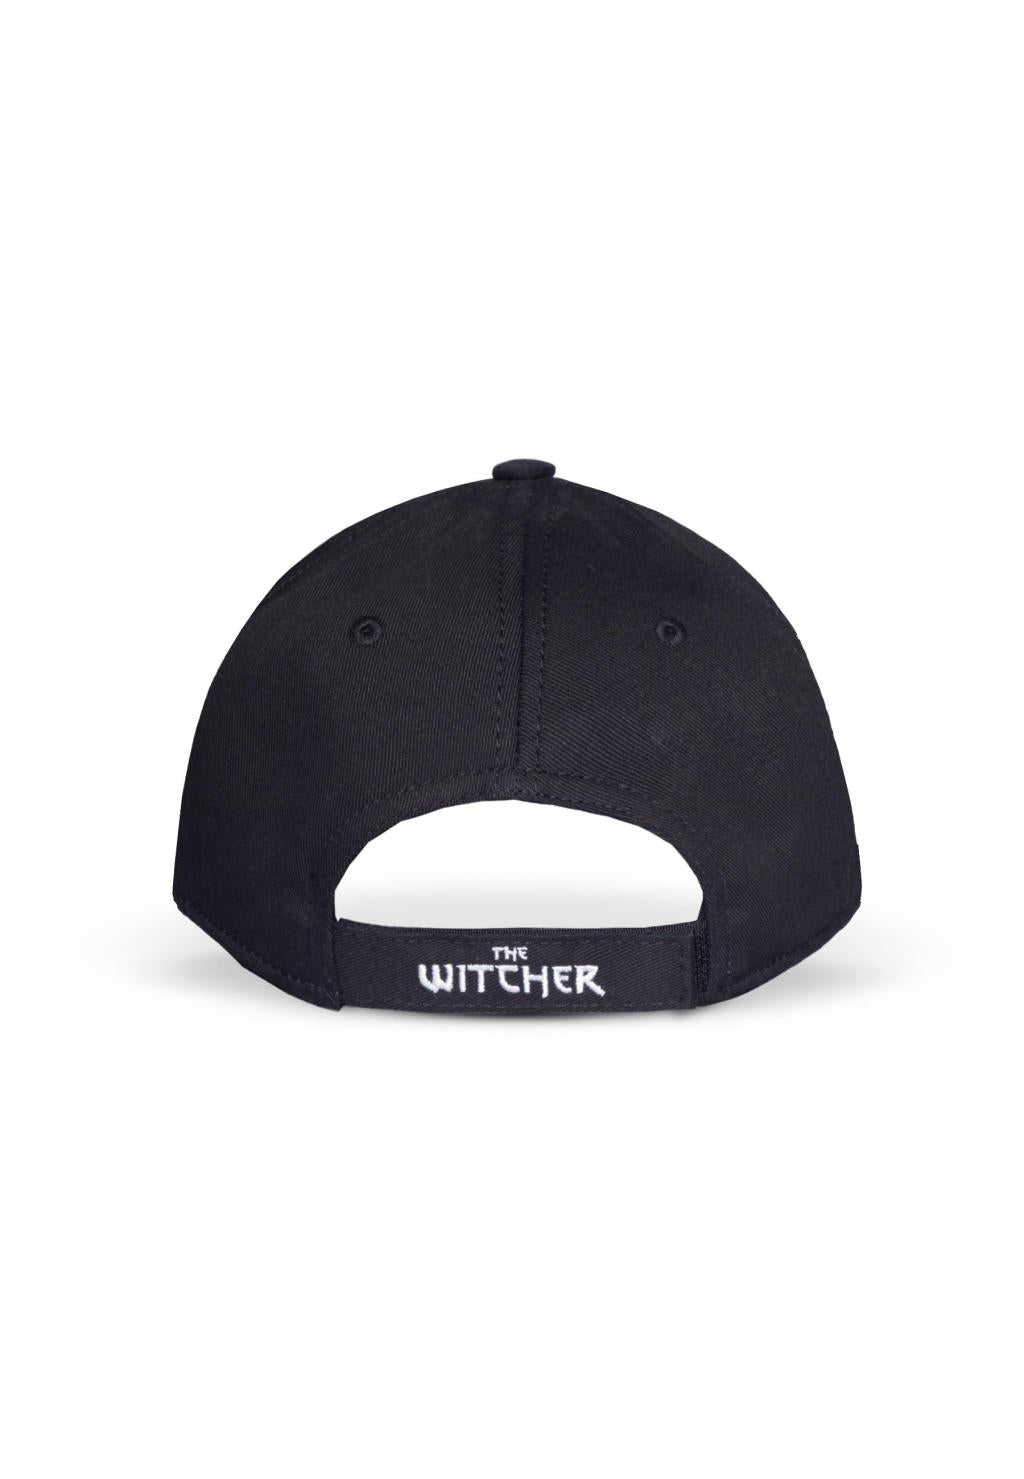 THE WITCHER - Signs - Adjustable Cap